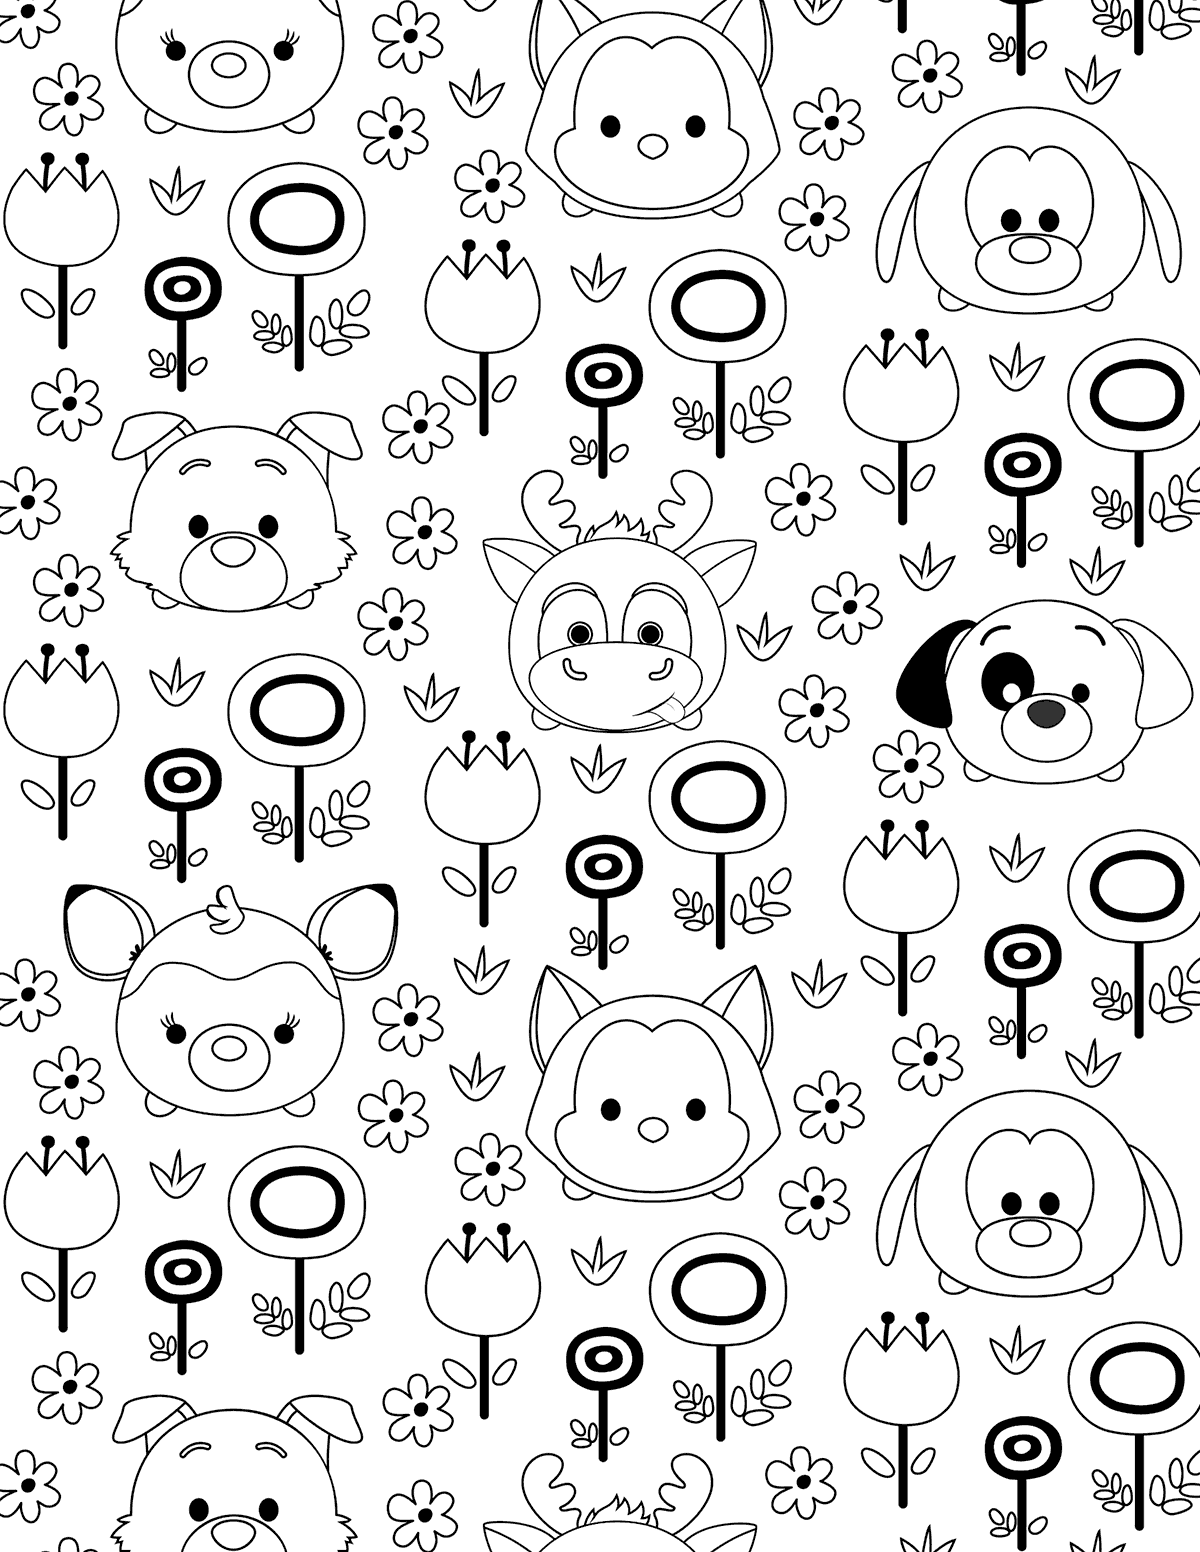 Tsum Tsum Characters and Patterns Coloring Page